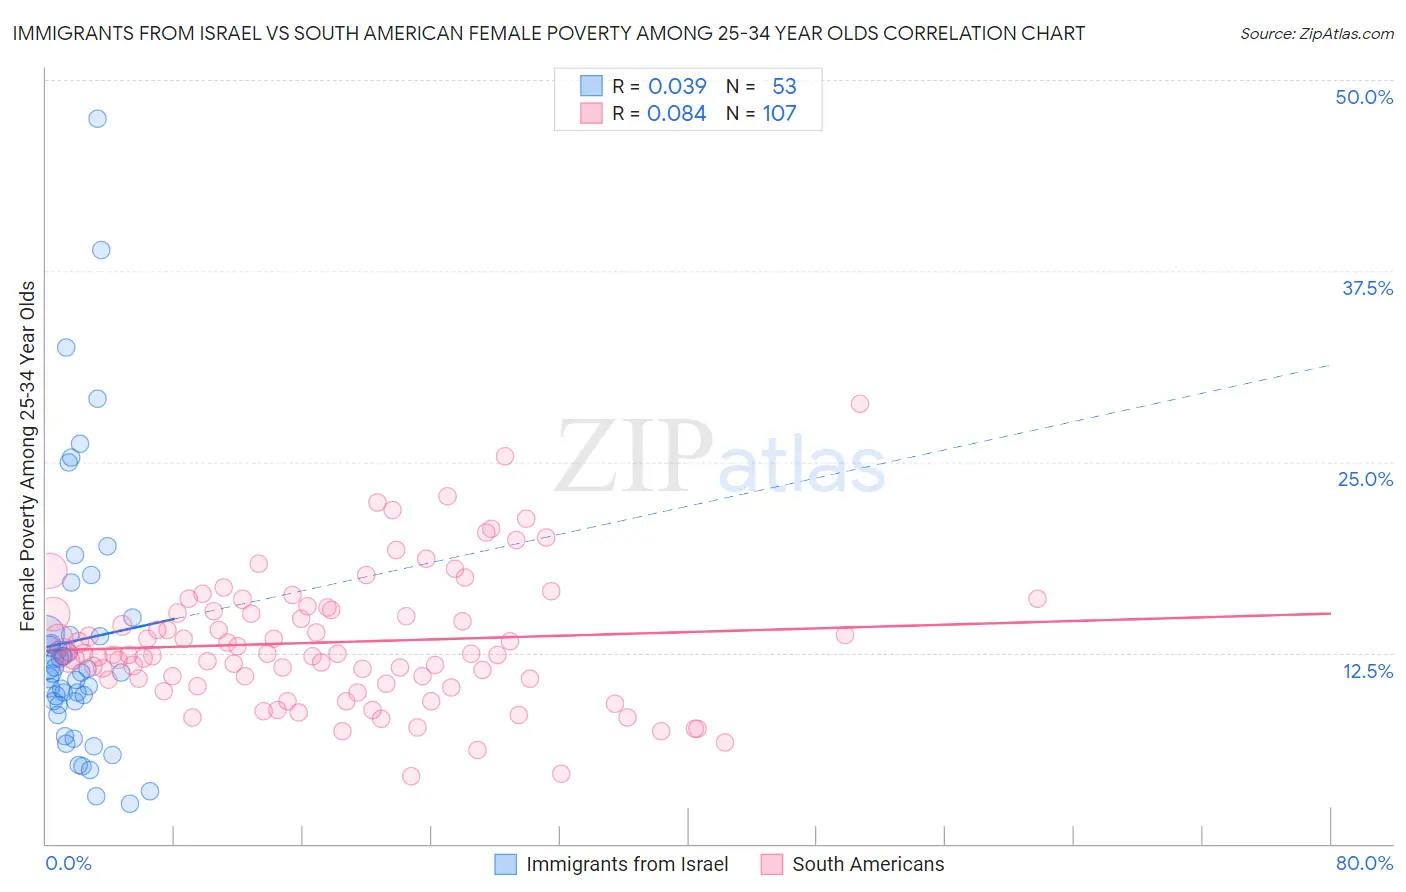 Immigrants from Israel vs South American Female Poverty Among 25-34 Year Olds